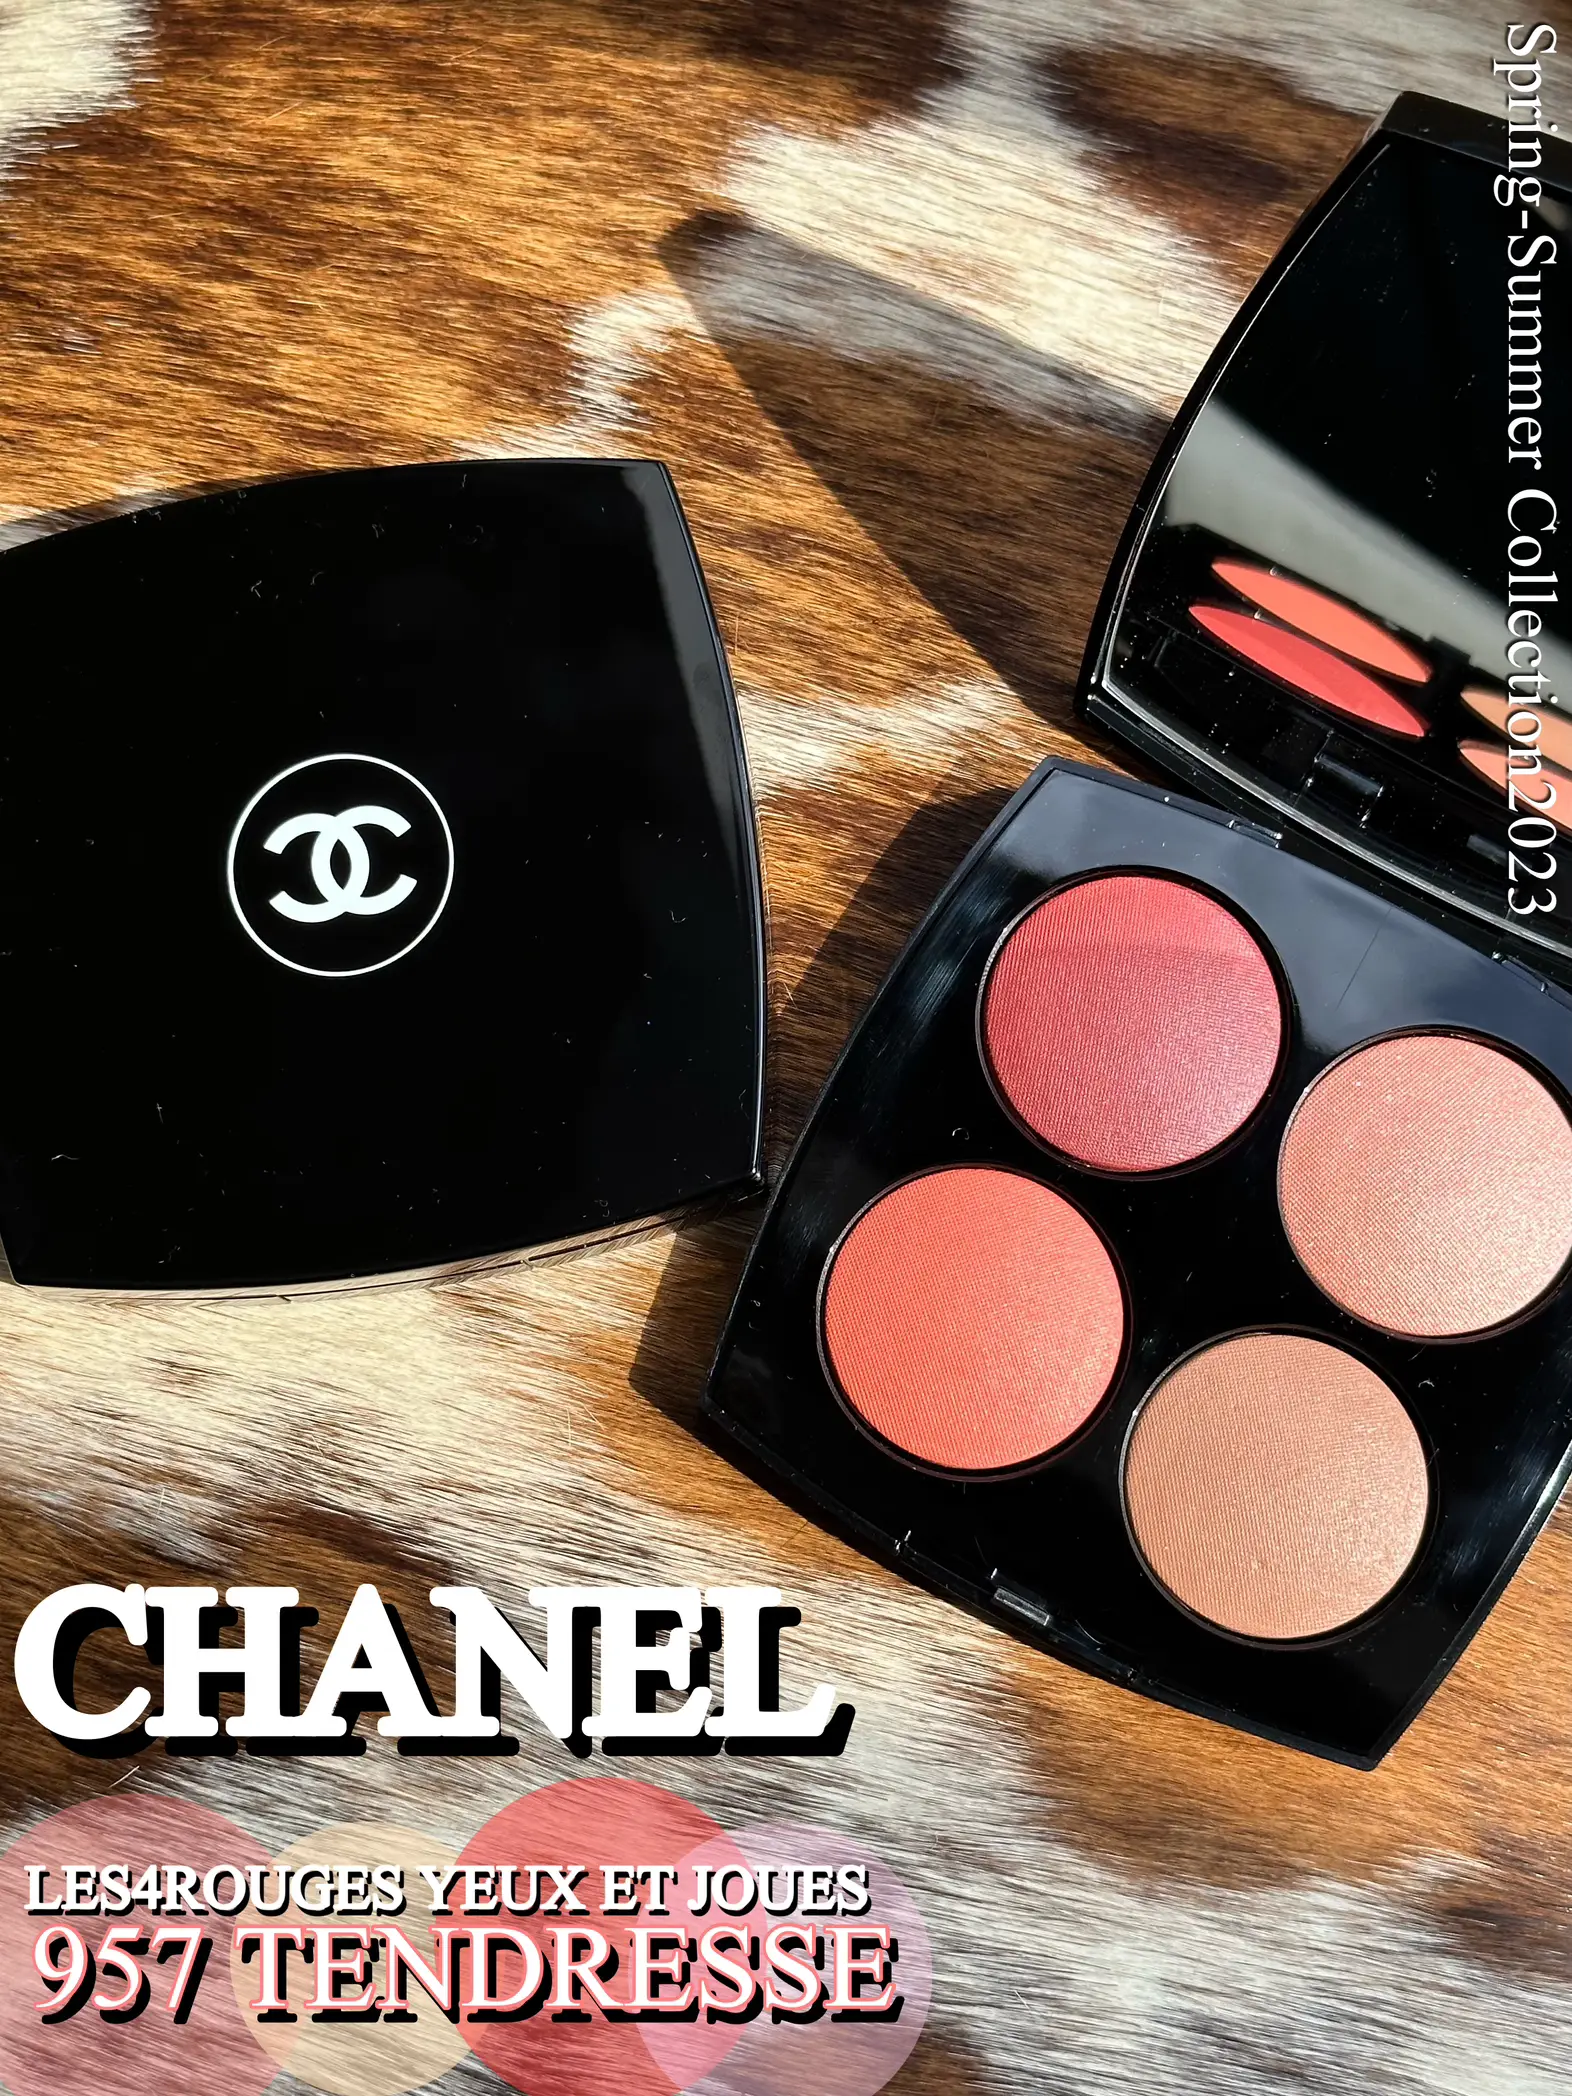 LES 4 ROUGES YEUX ET JOUES Eyeshadow and blush palette 957 - Tendresse